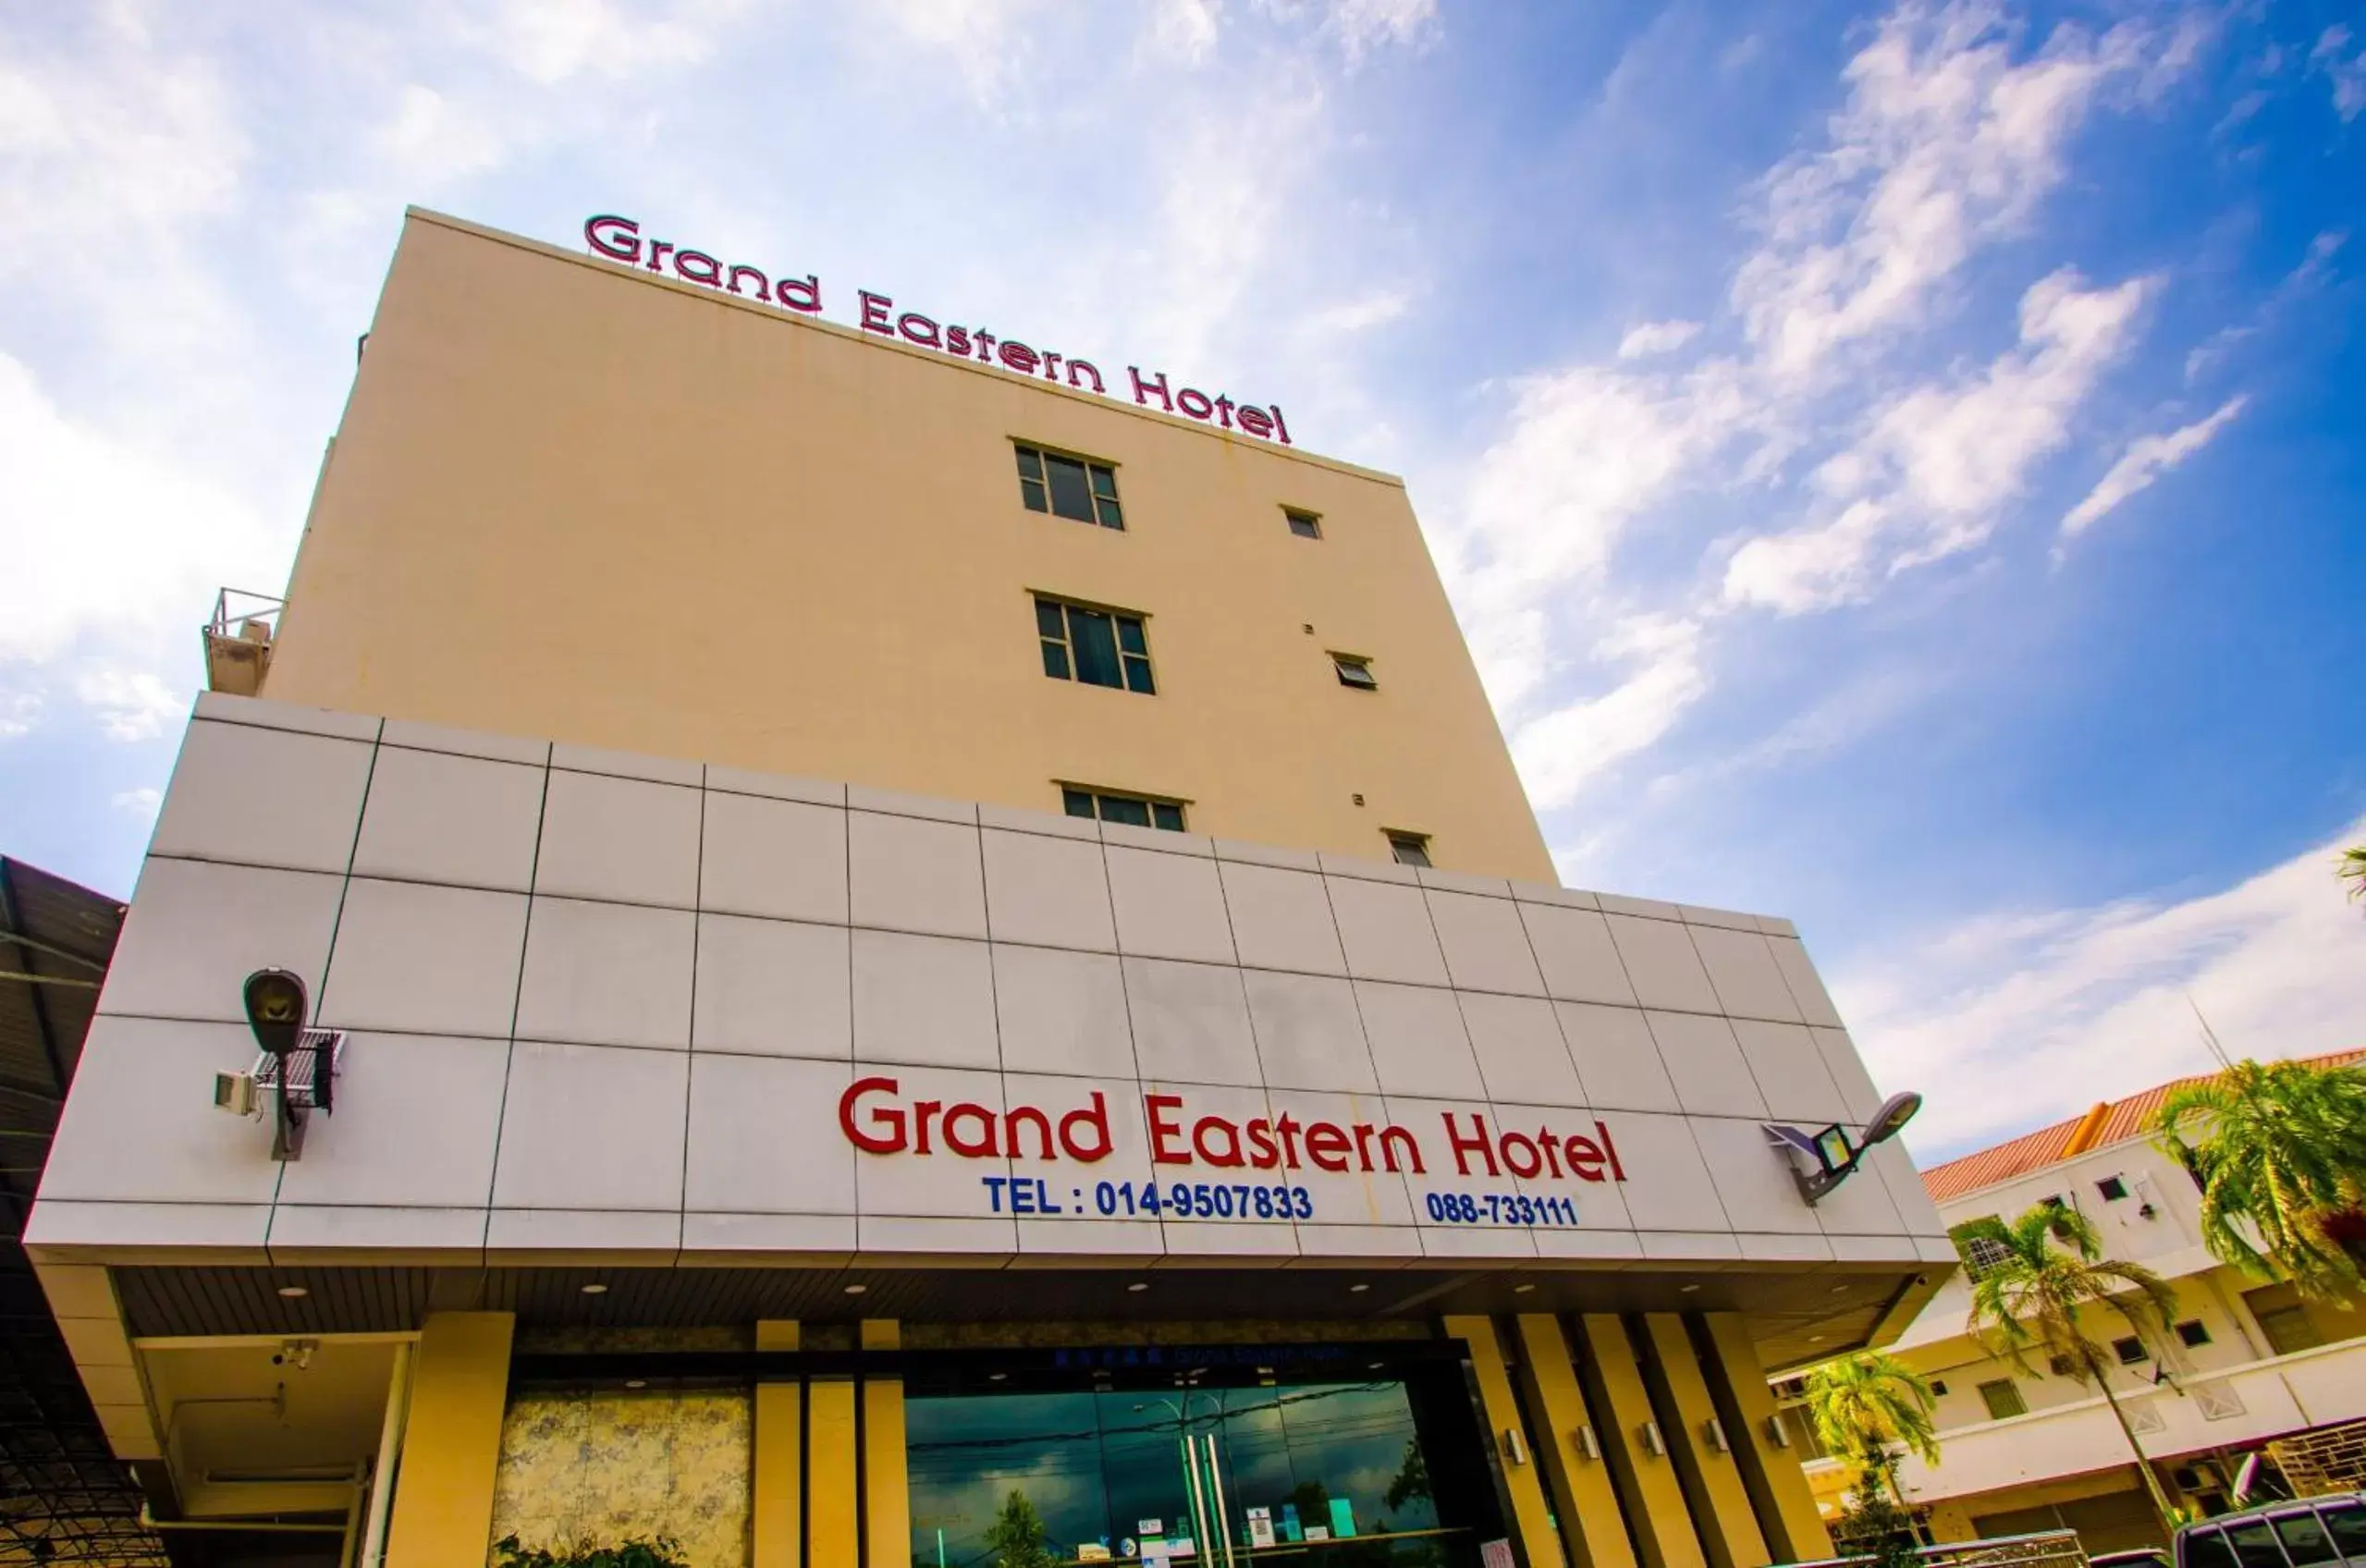 Property Building in GRAND EASTERN HOTEL SDN BHD